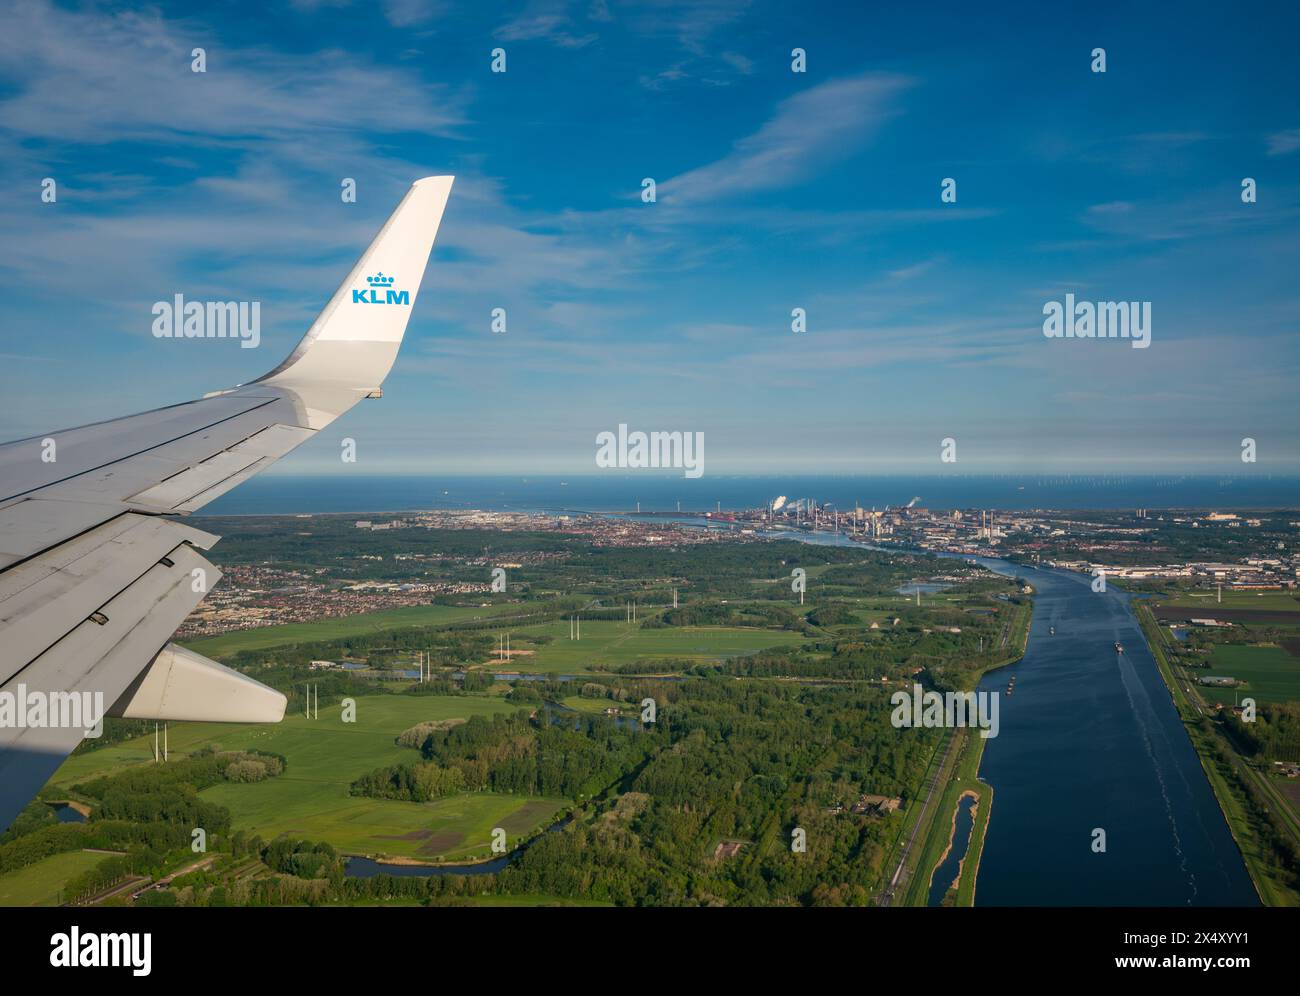 View from KLM plane window of airplane wing, canal from Ijmuiden and Tata steel works in the distance, Netherlands Stock Photo